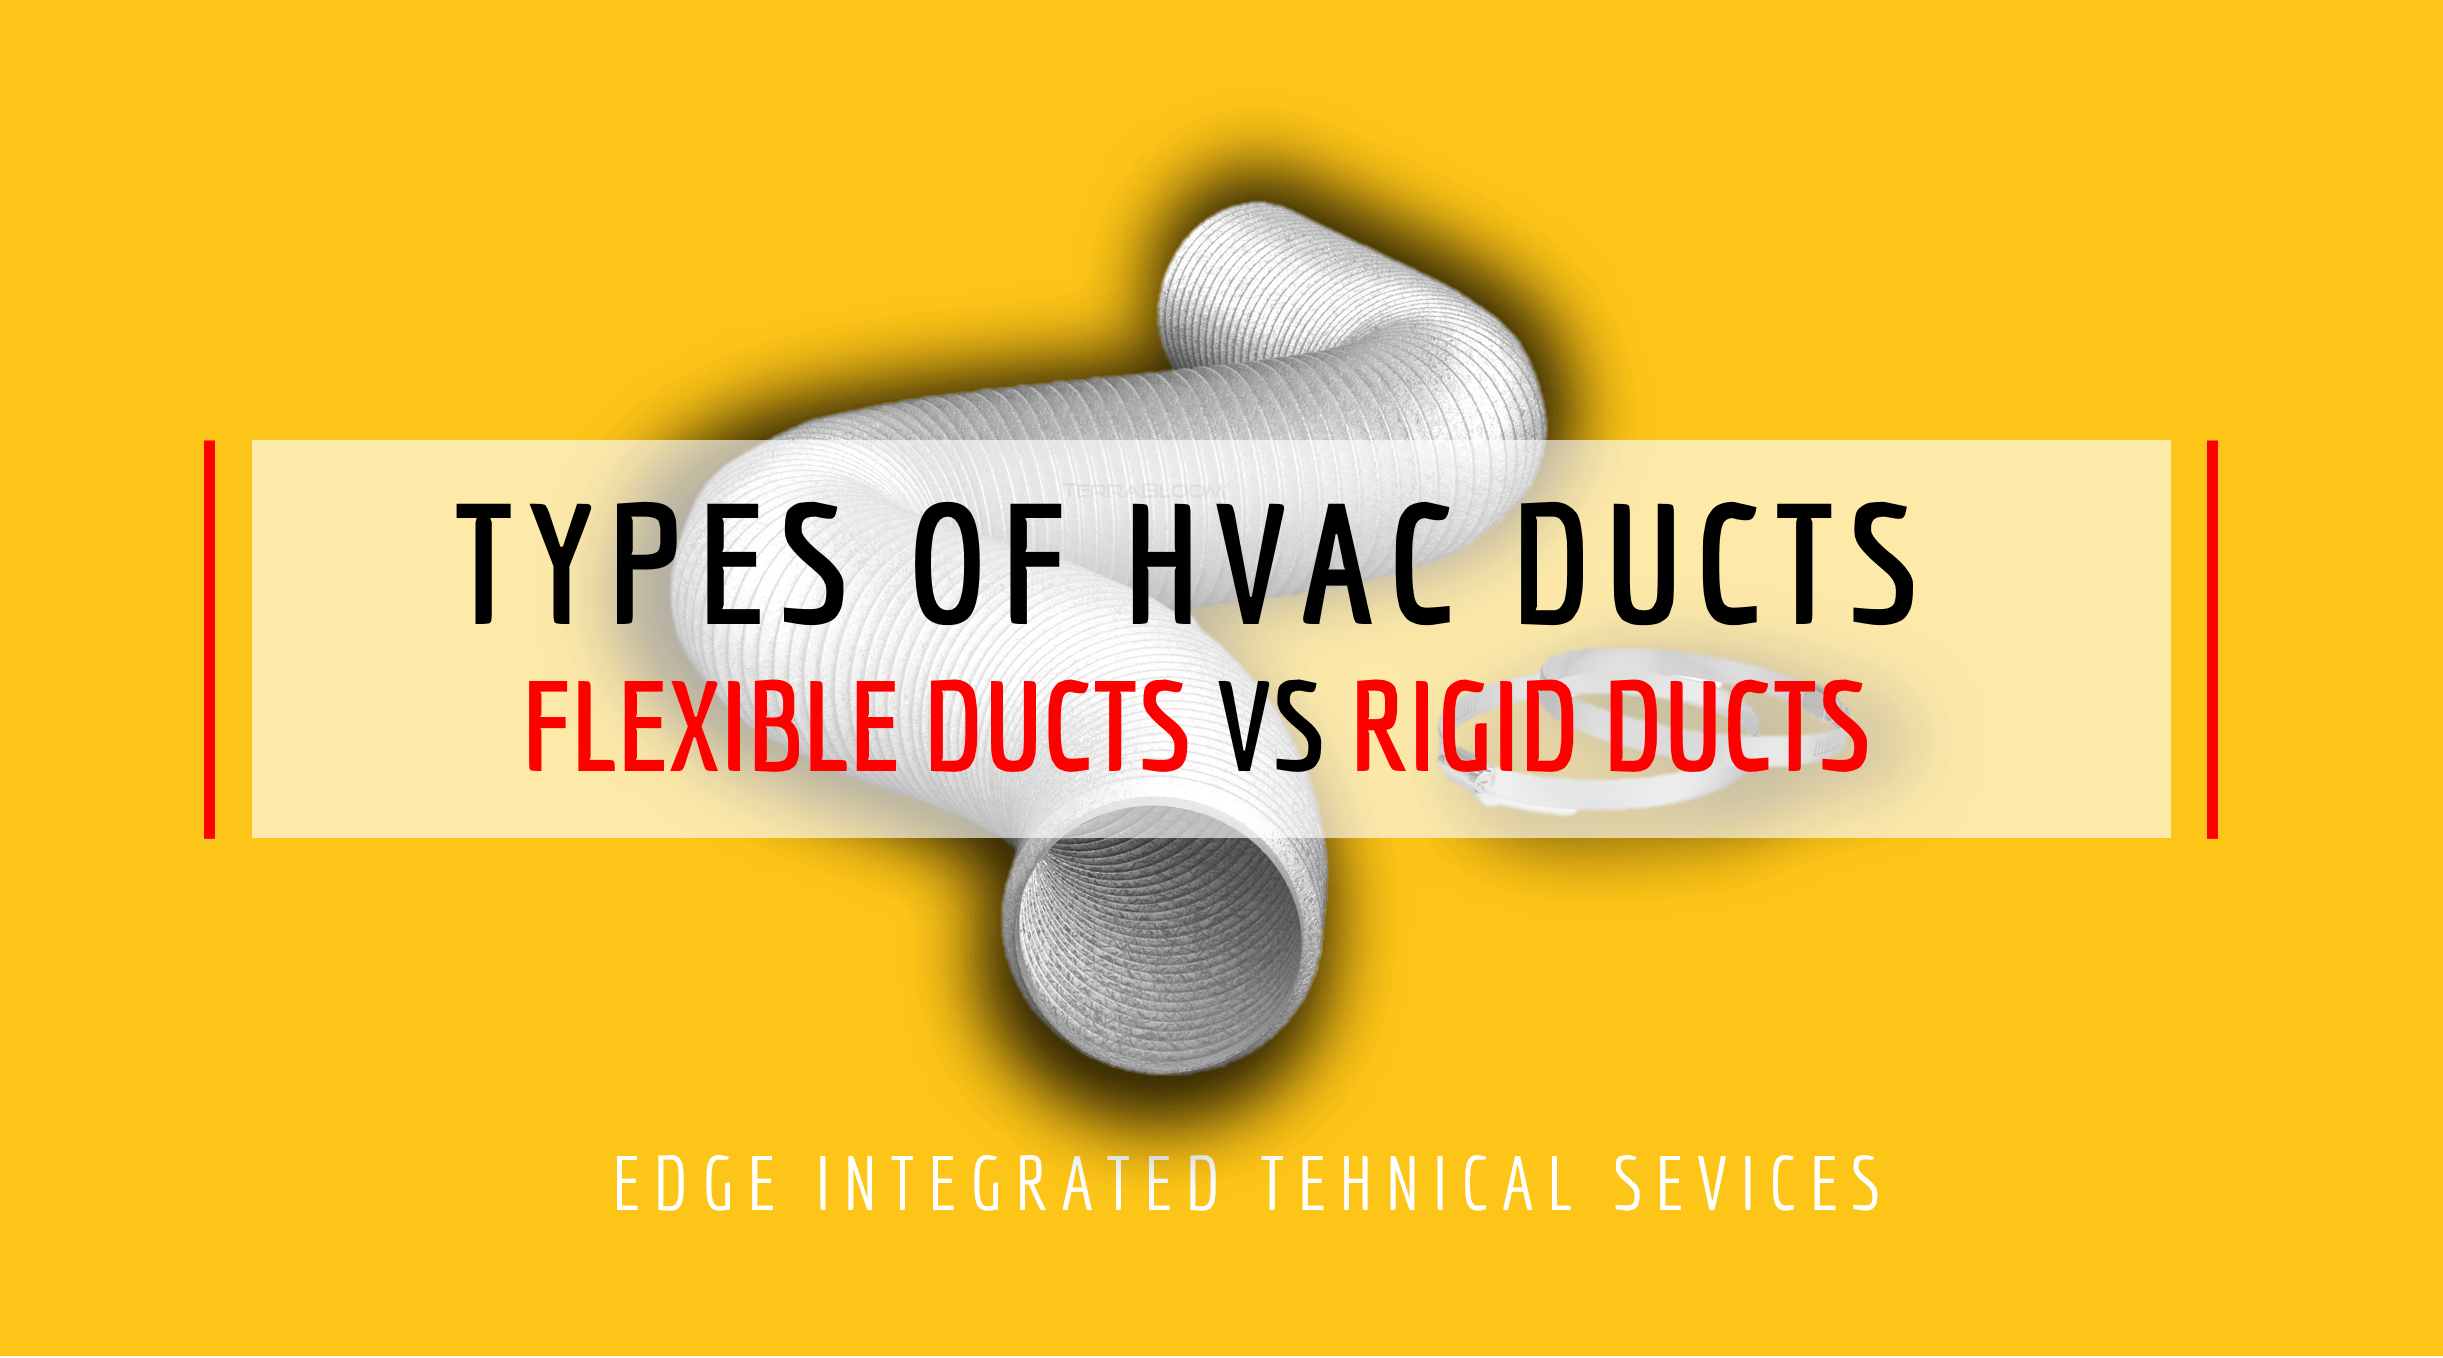 Types of HVAC Ducts Flexible Ducts VS Rigid Ducts